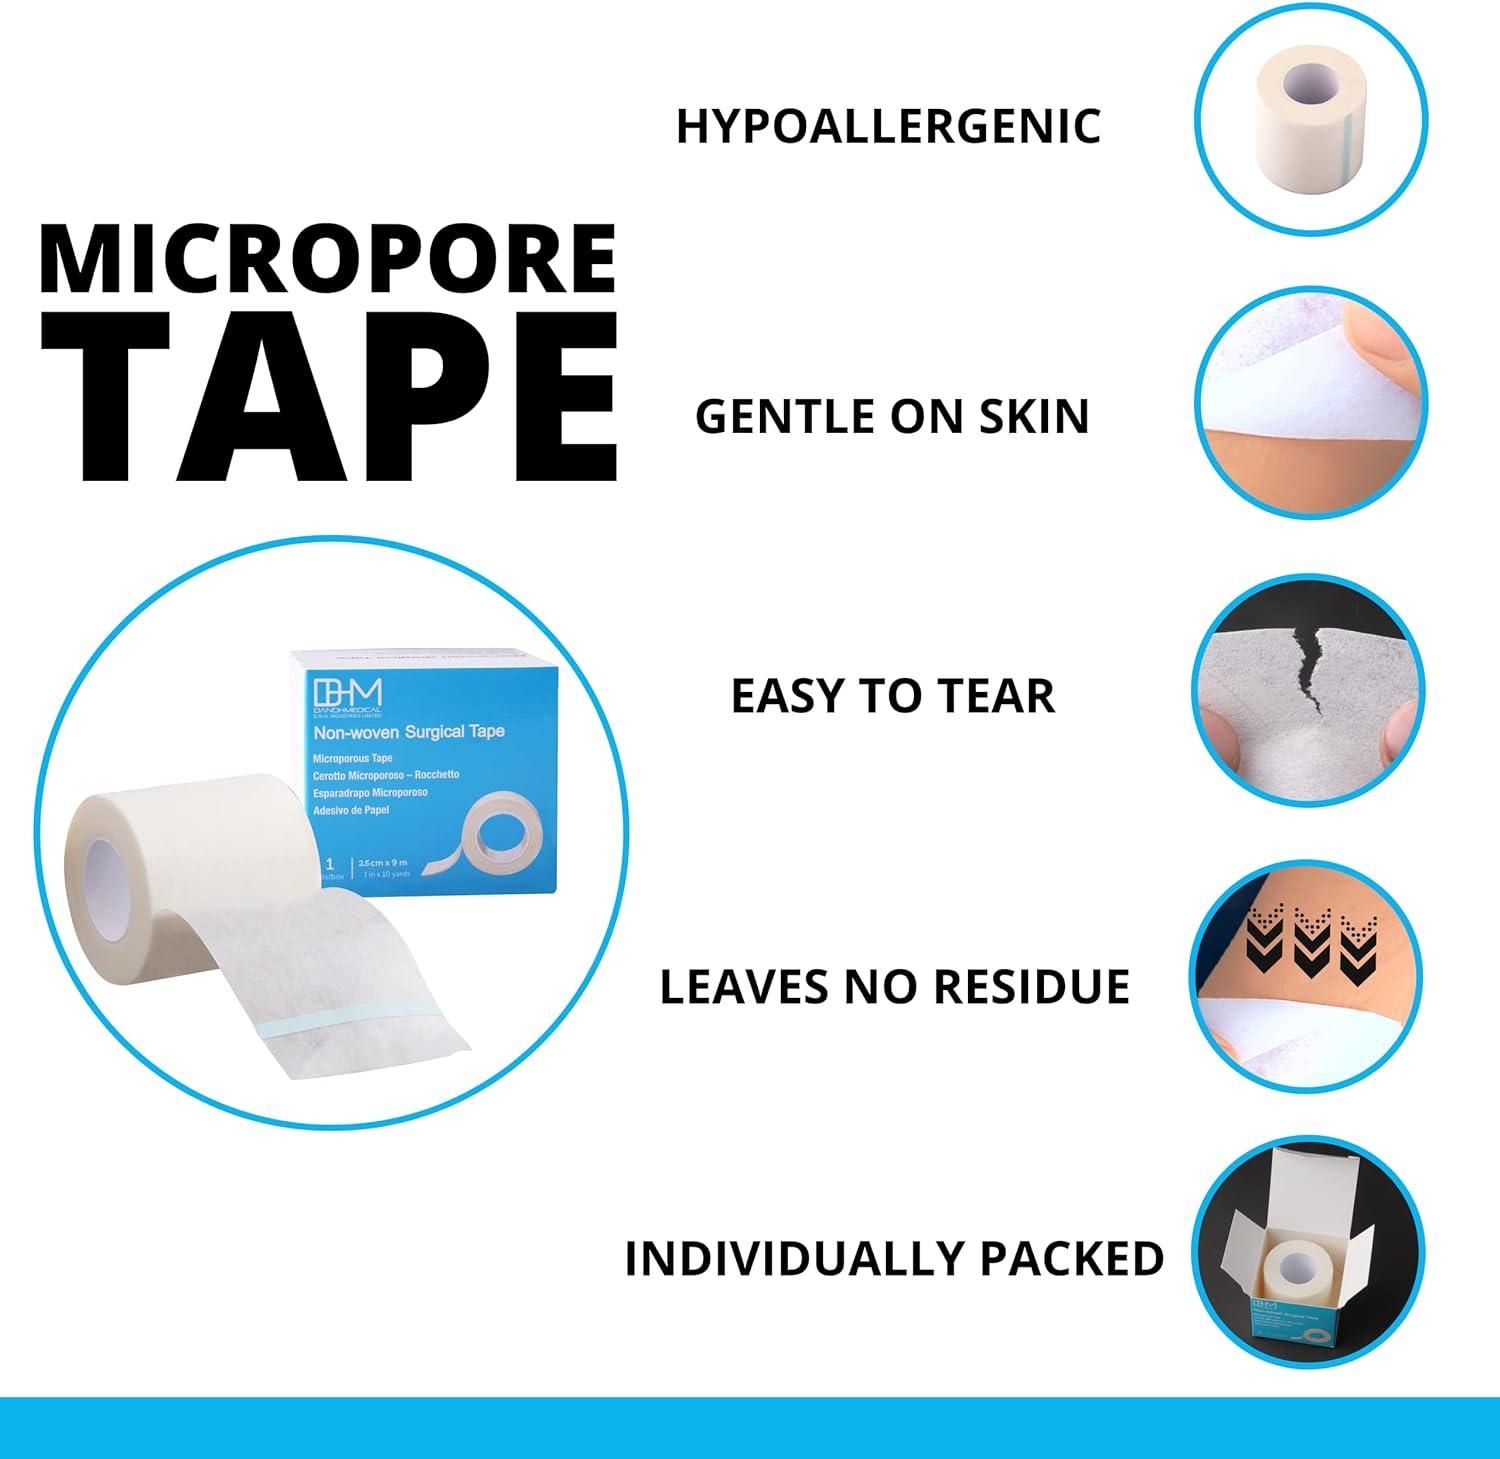 Paper Medical First Aid Surgical Tape 1 x 10 Yards [Pack of 12 Rolls] Lightweight Breathable Microporous Self Adhesive Latex Free Hypoallergenic